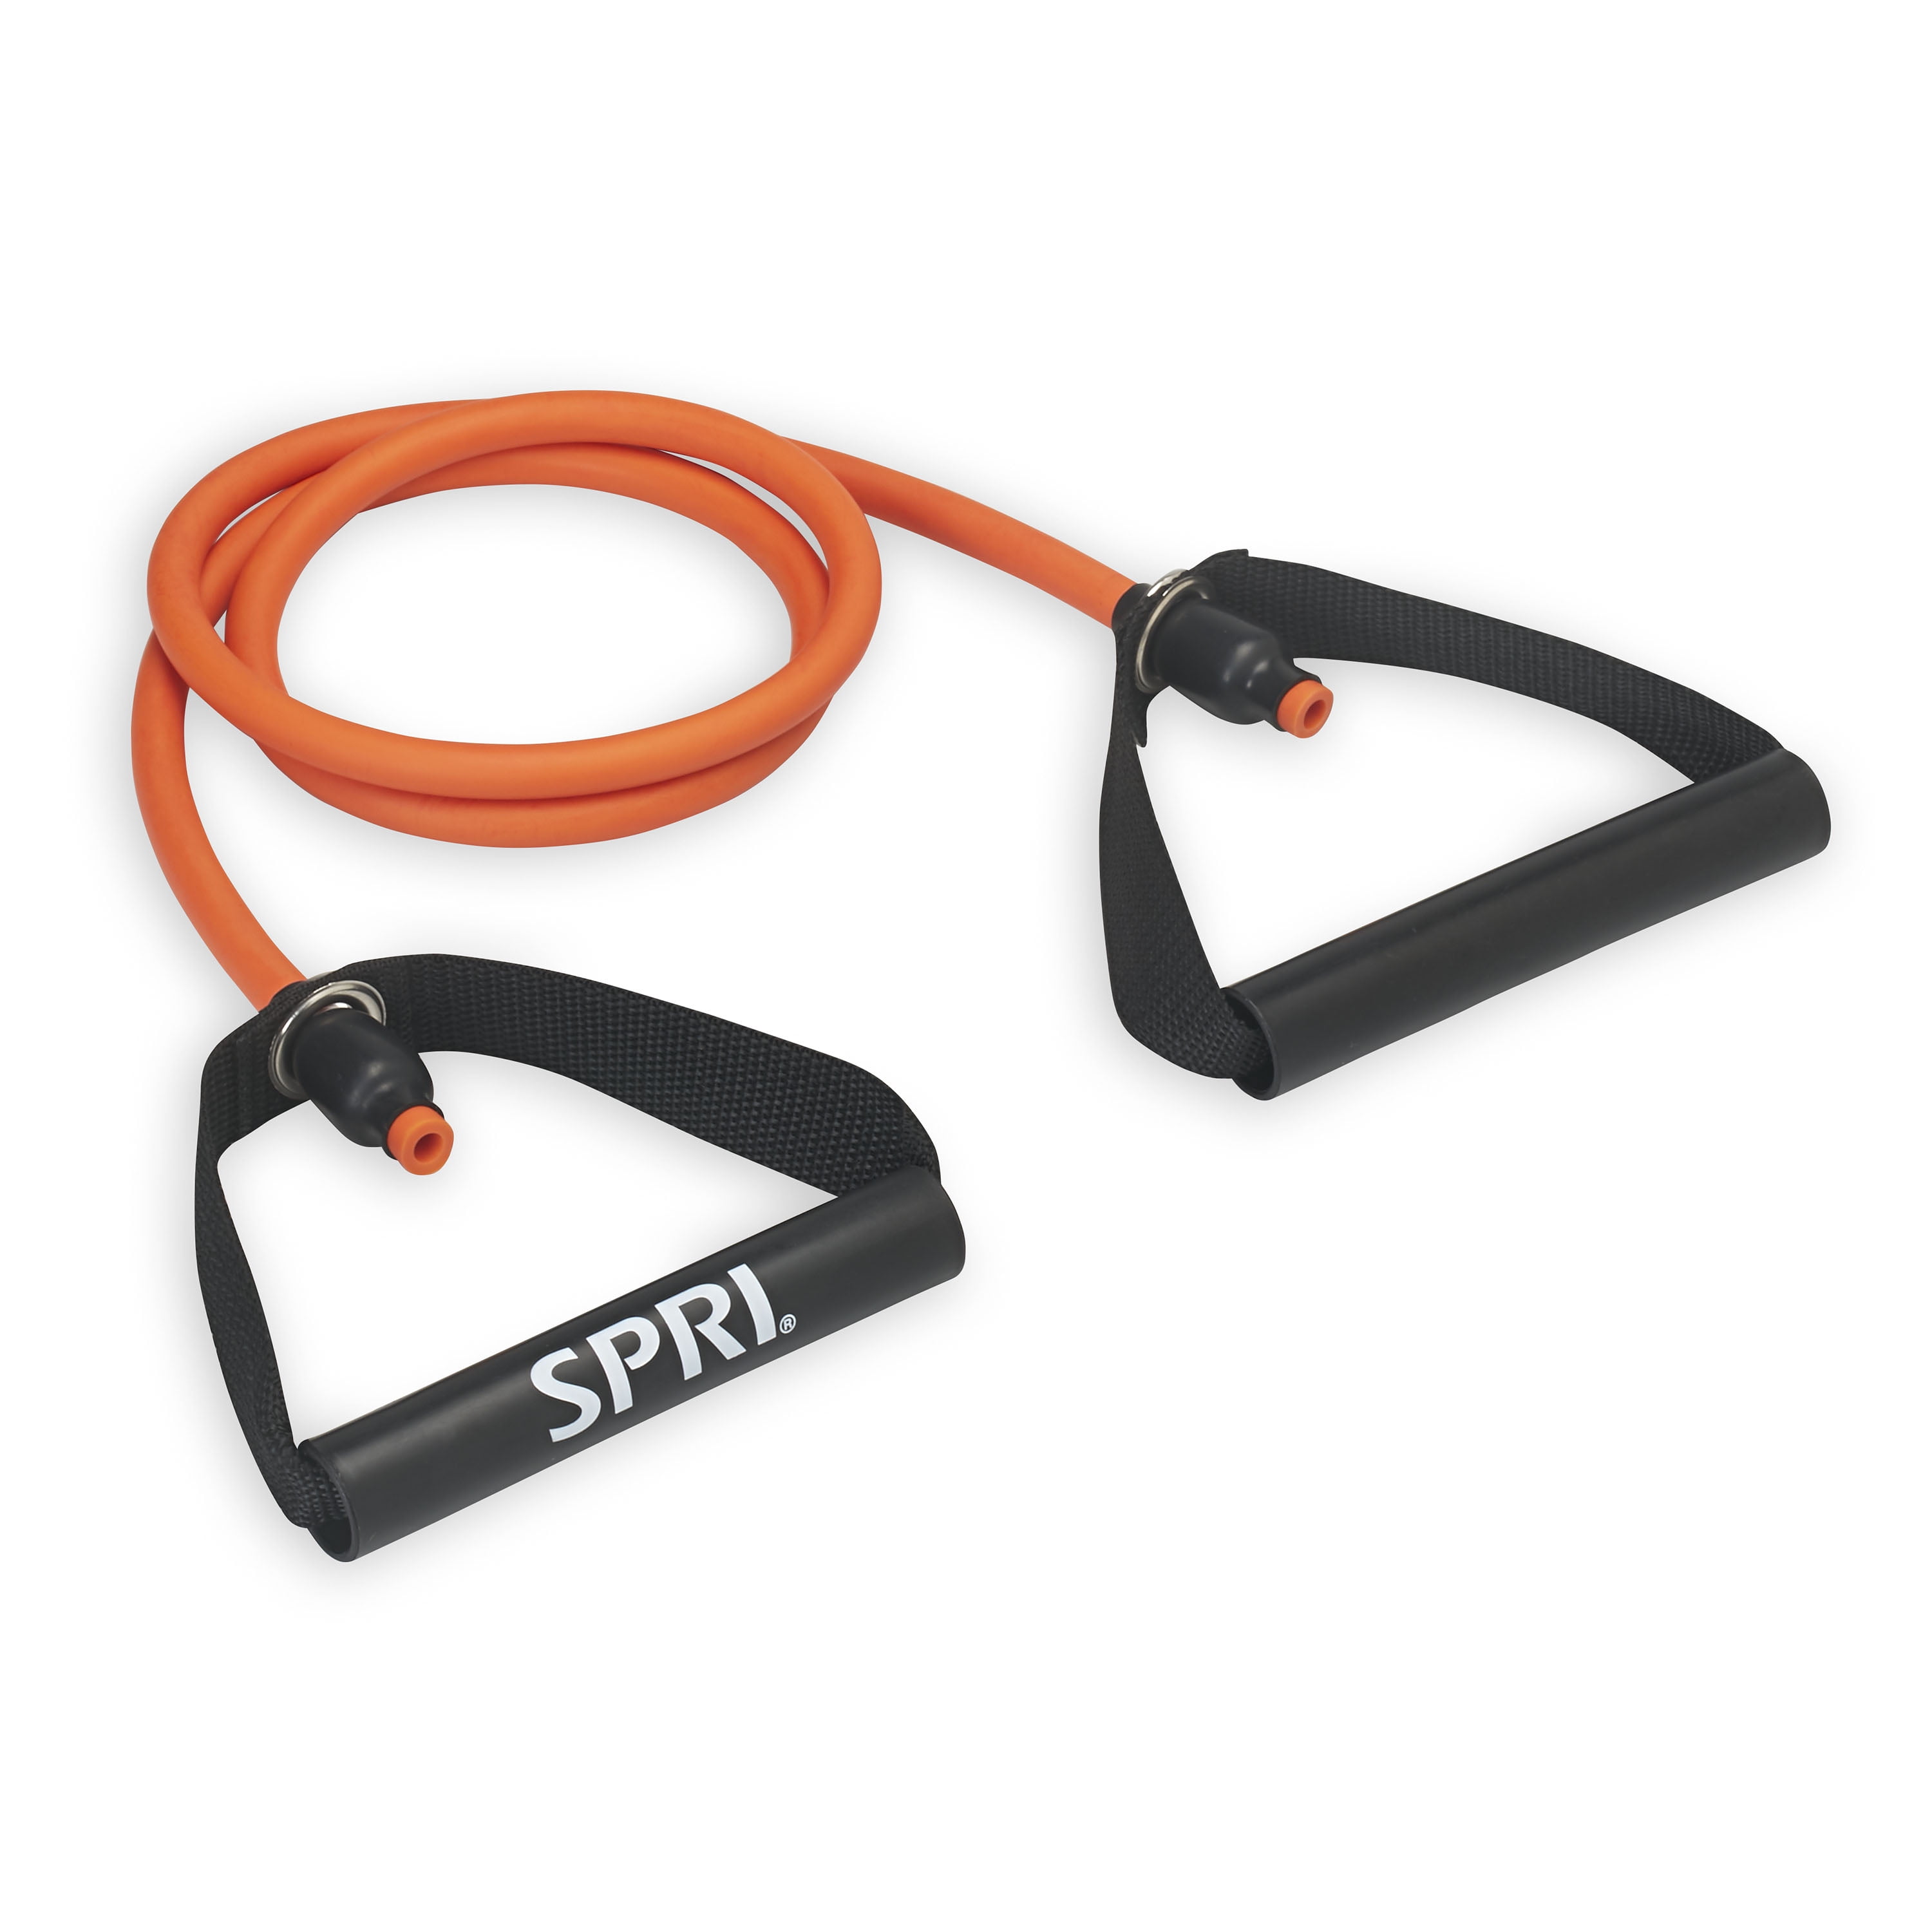 L Light Resistance up to 20 lbs SHIPS FREE Ignite by SPRI Resistance Cords 